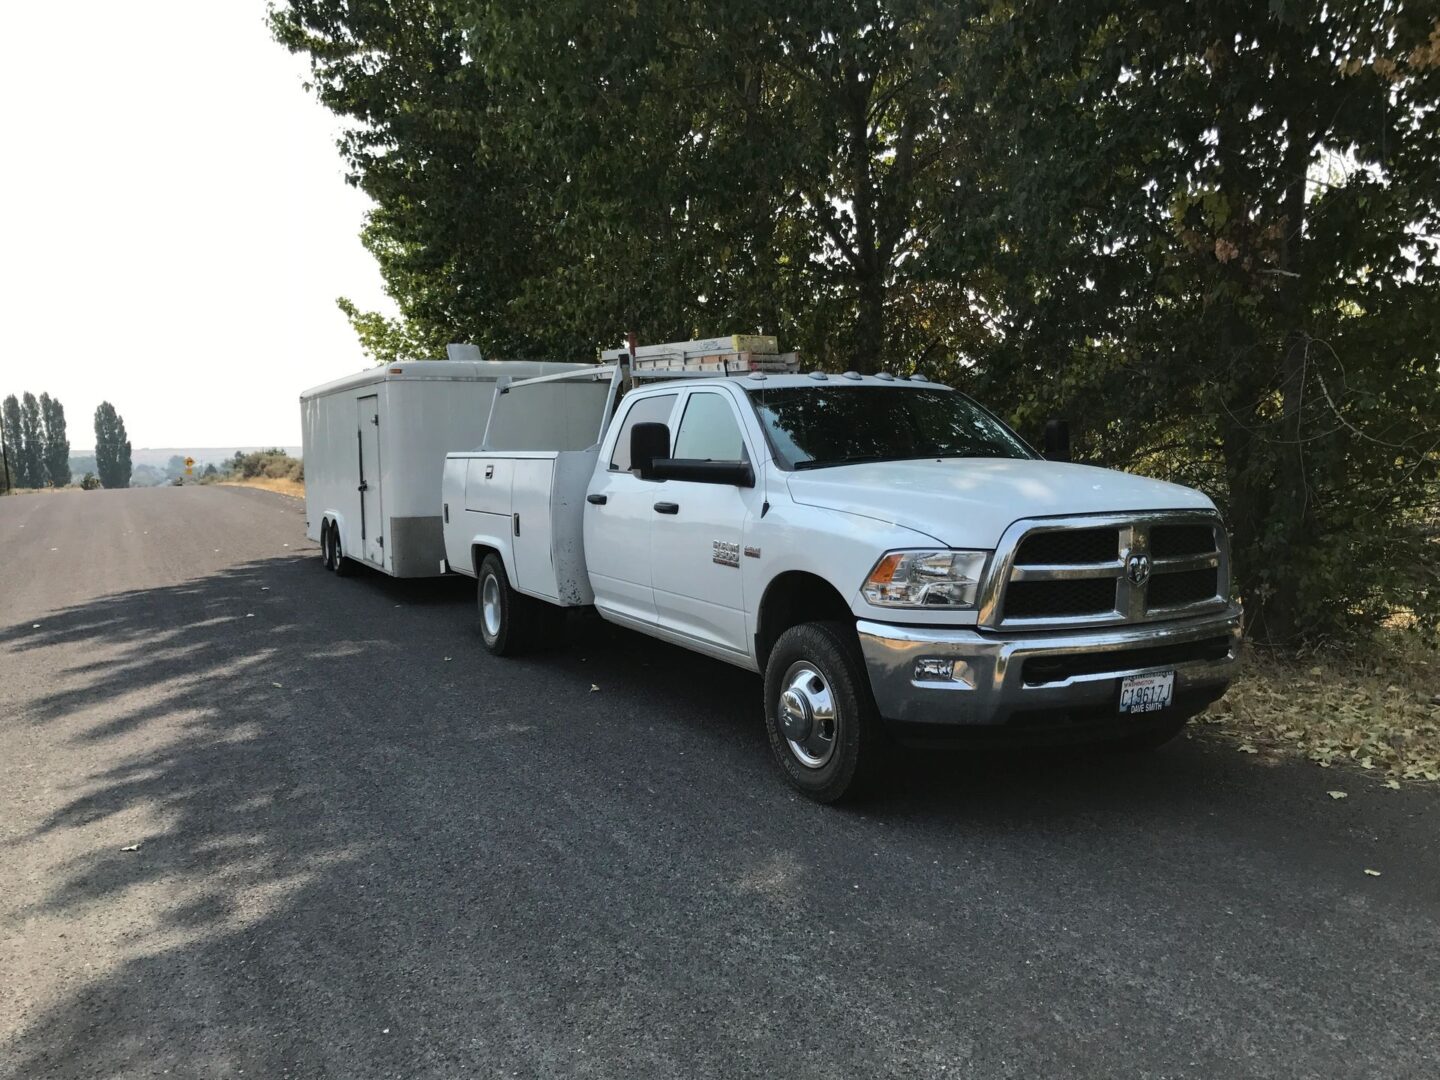 A white truck and trailer on the side of the road.